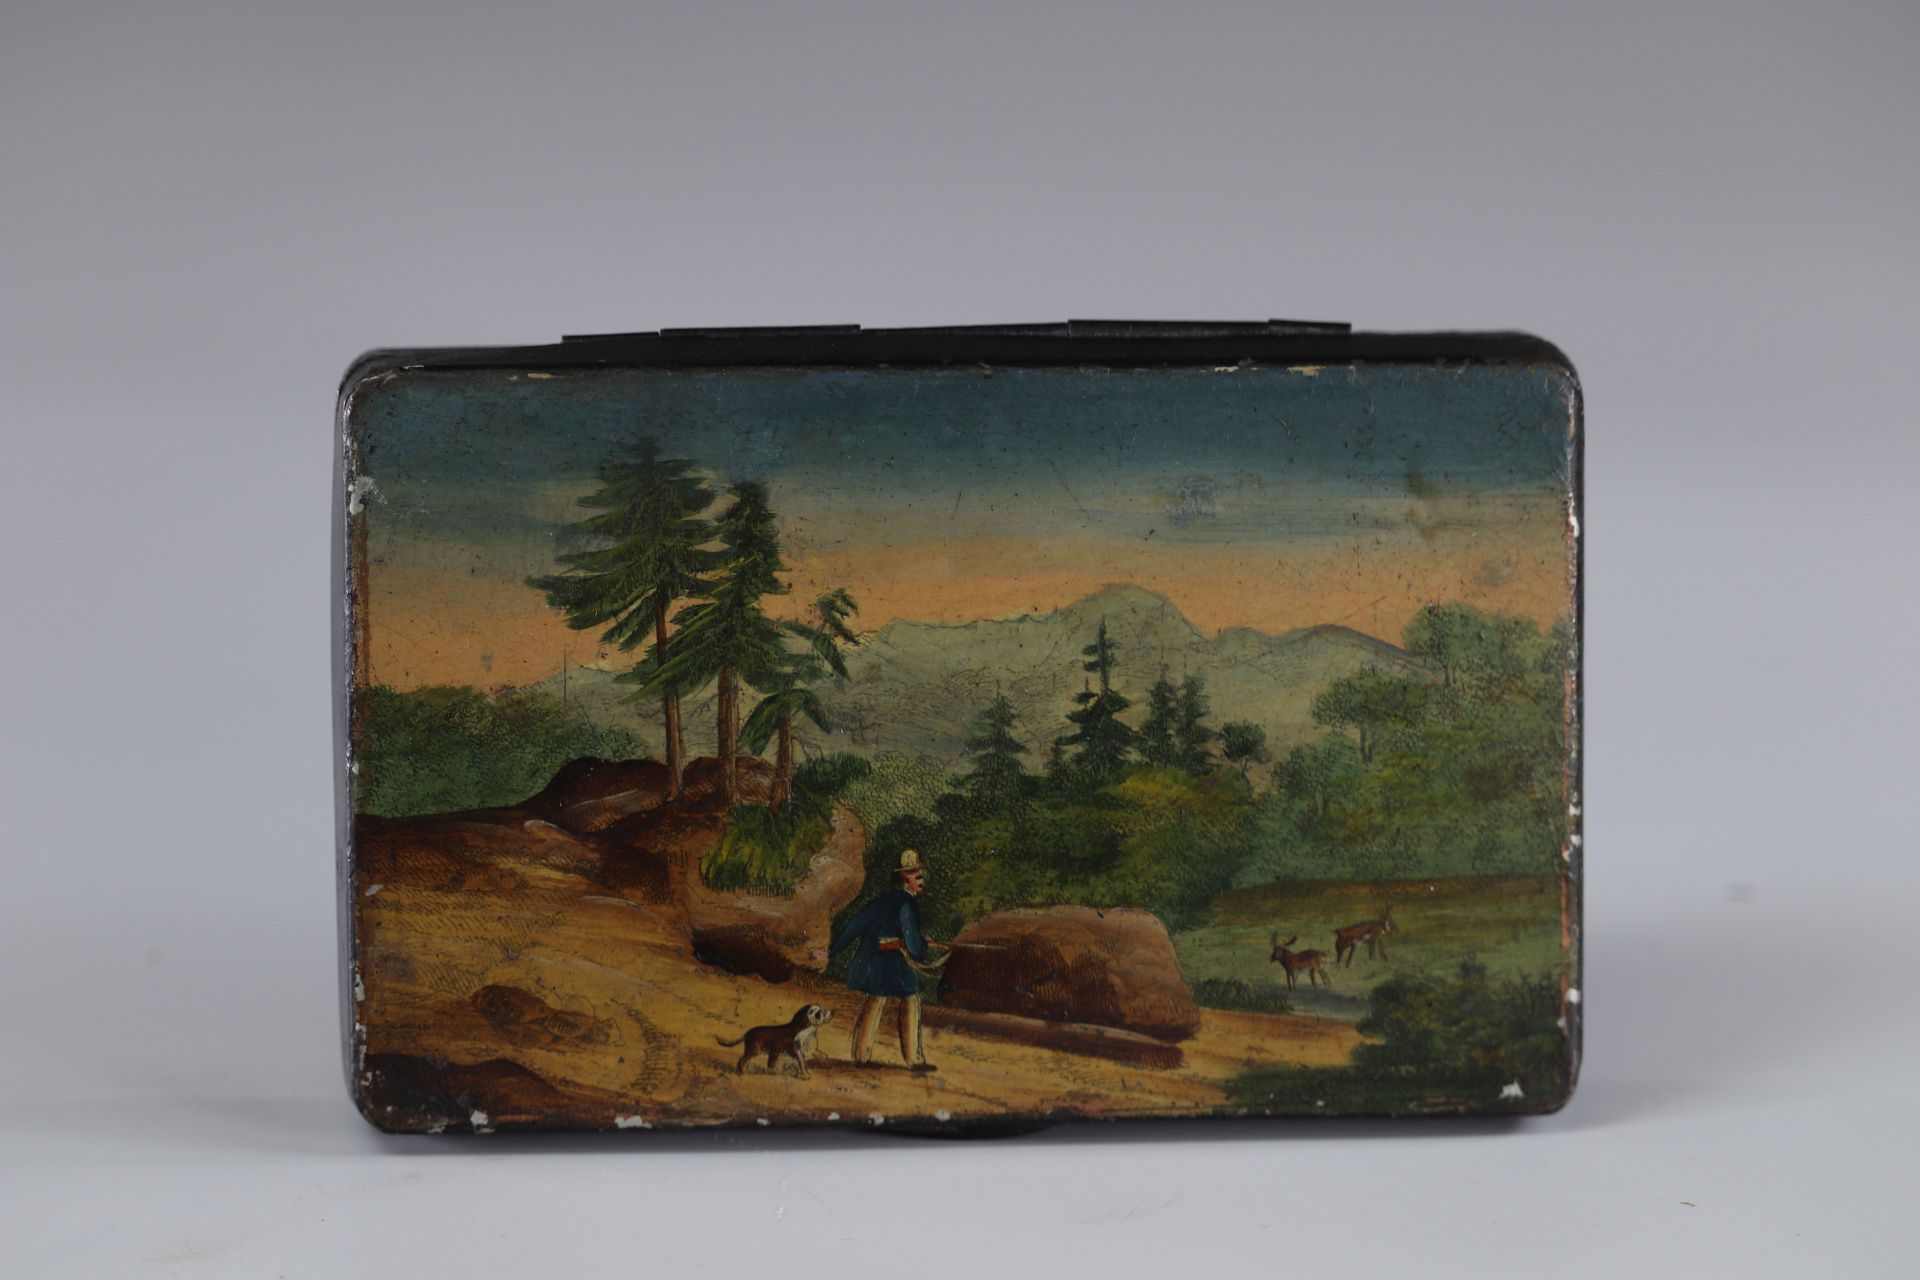 box painted with a hunting scene 19th